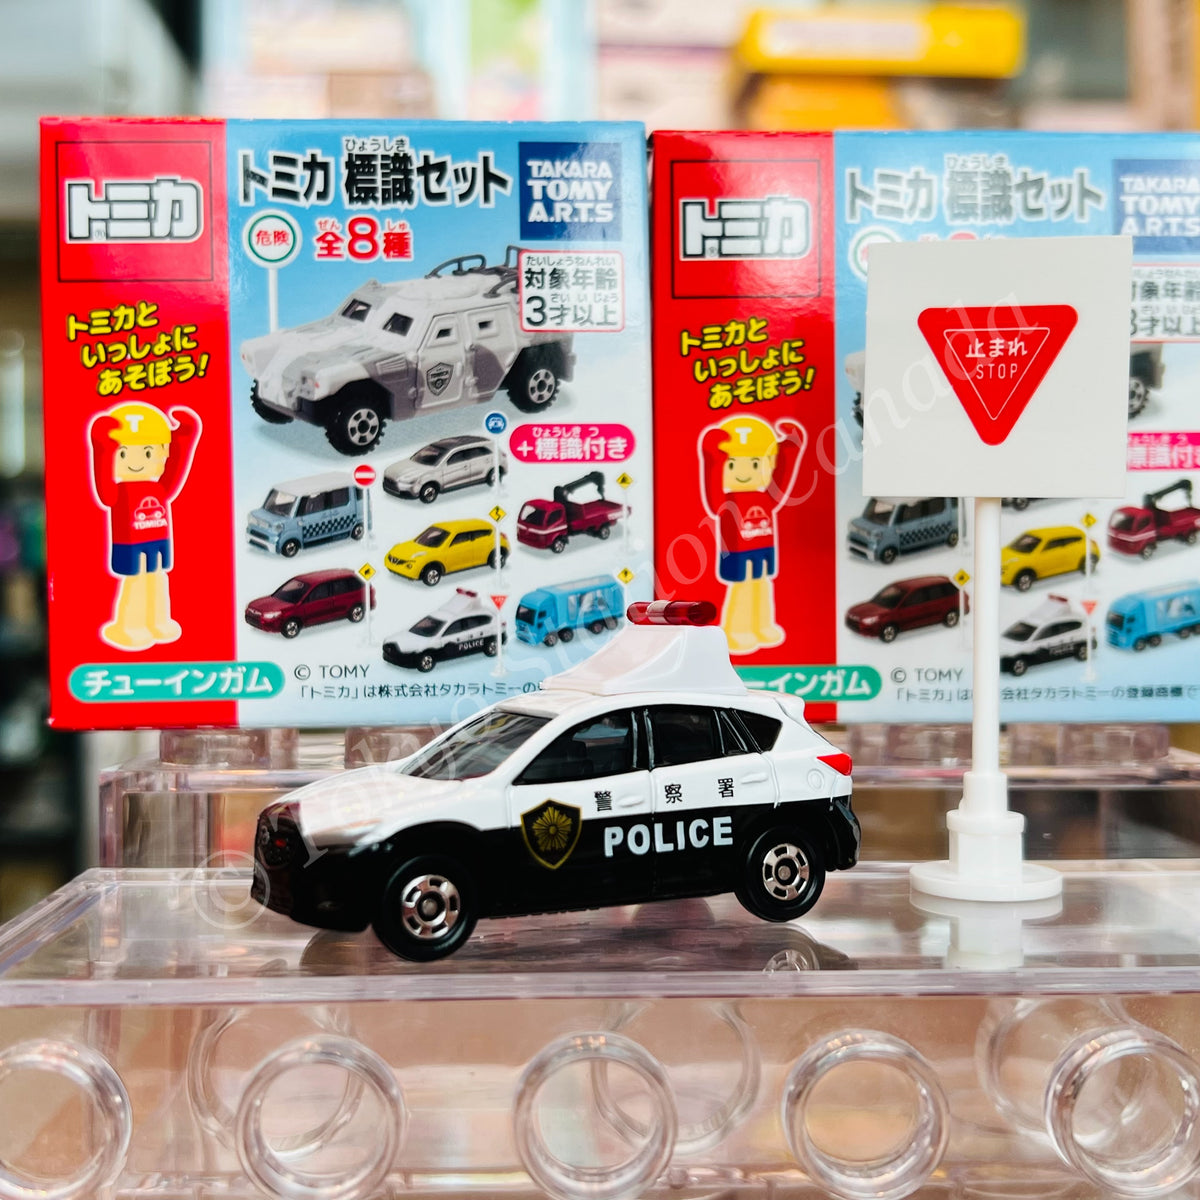 TAKARA TOMY A.R.T.S TOMICA Sign Set #5 Mazda CX-5 Patrol Car with a road sign